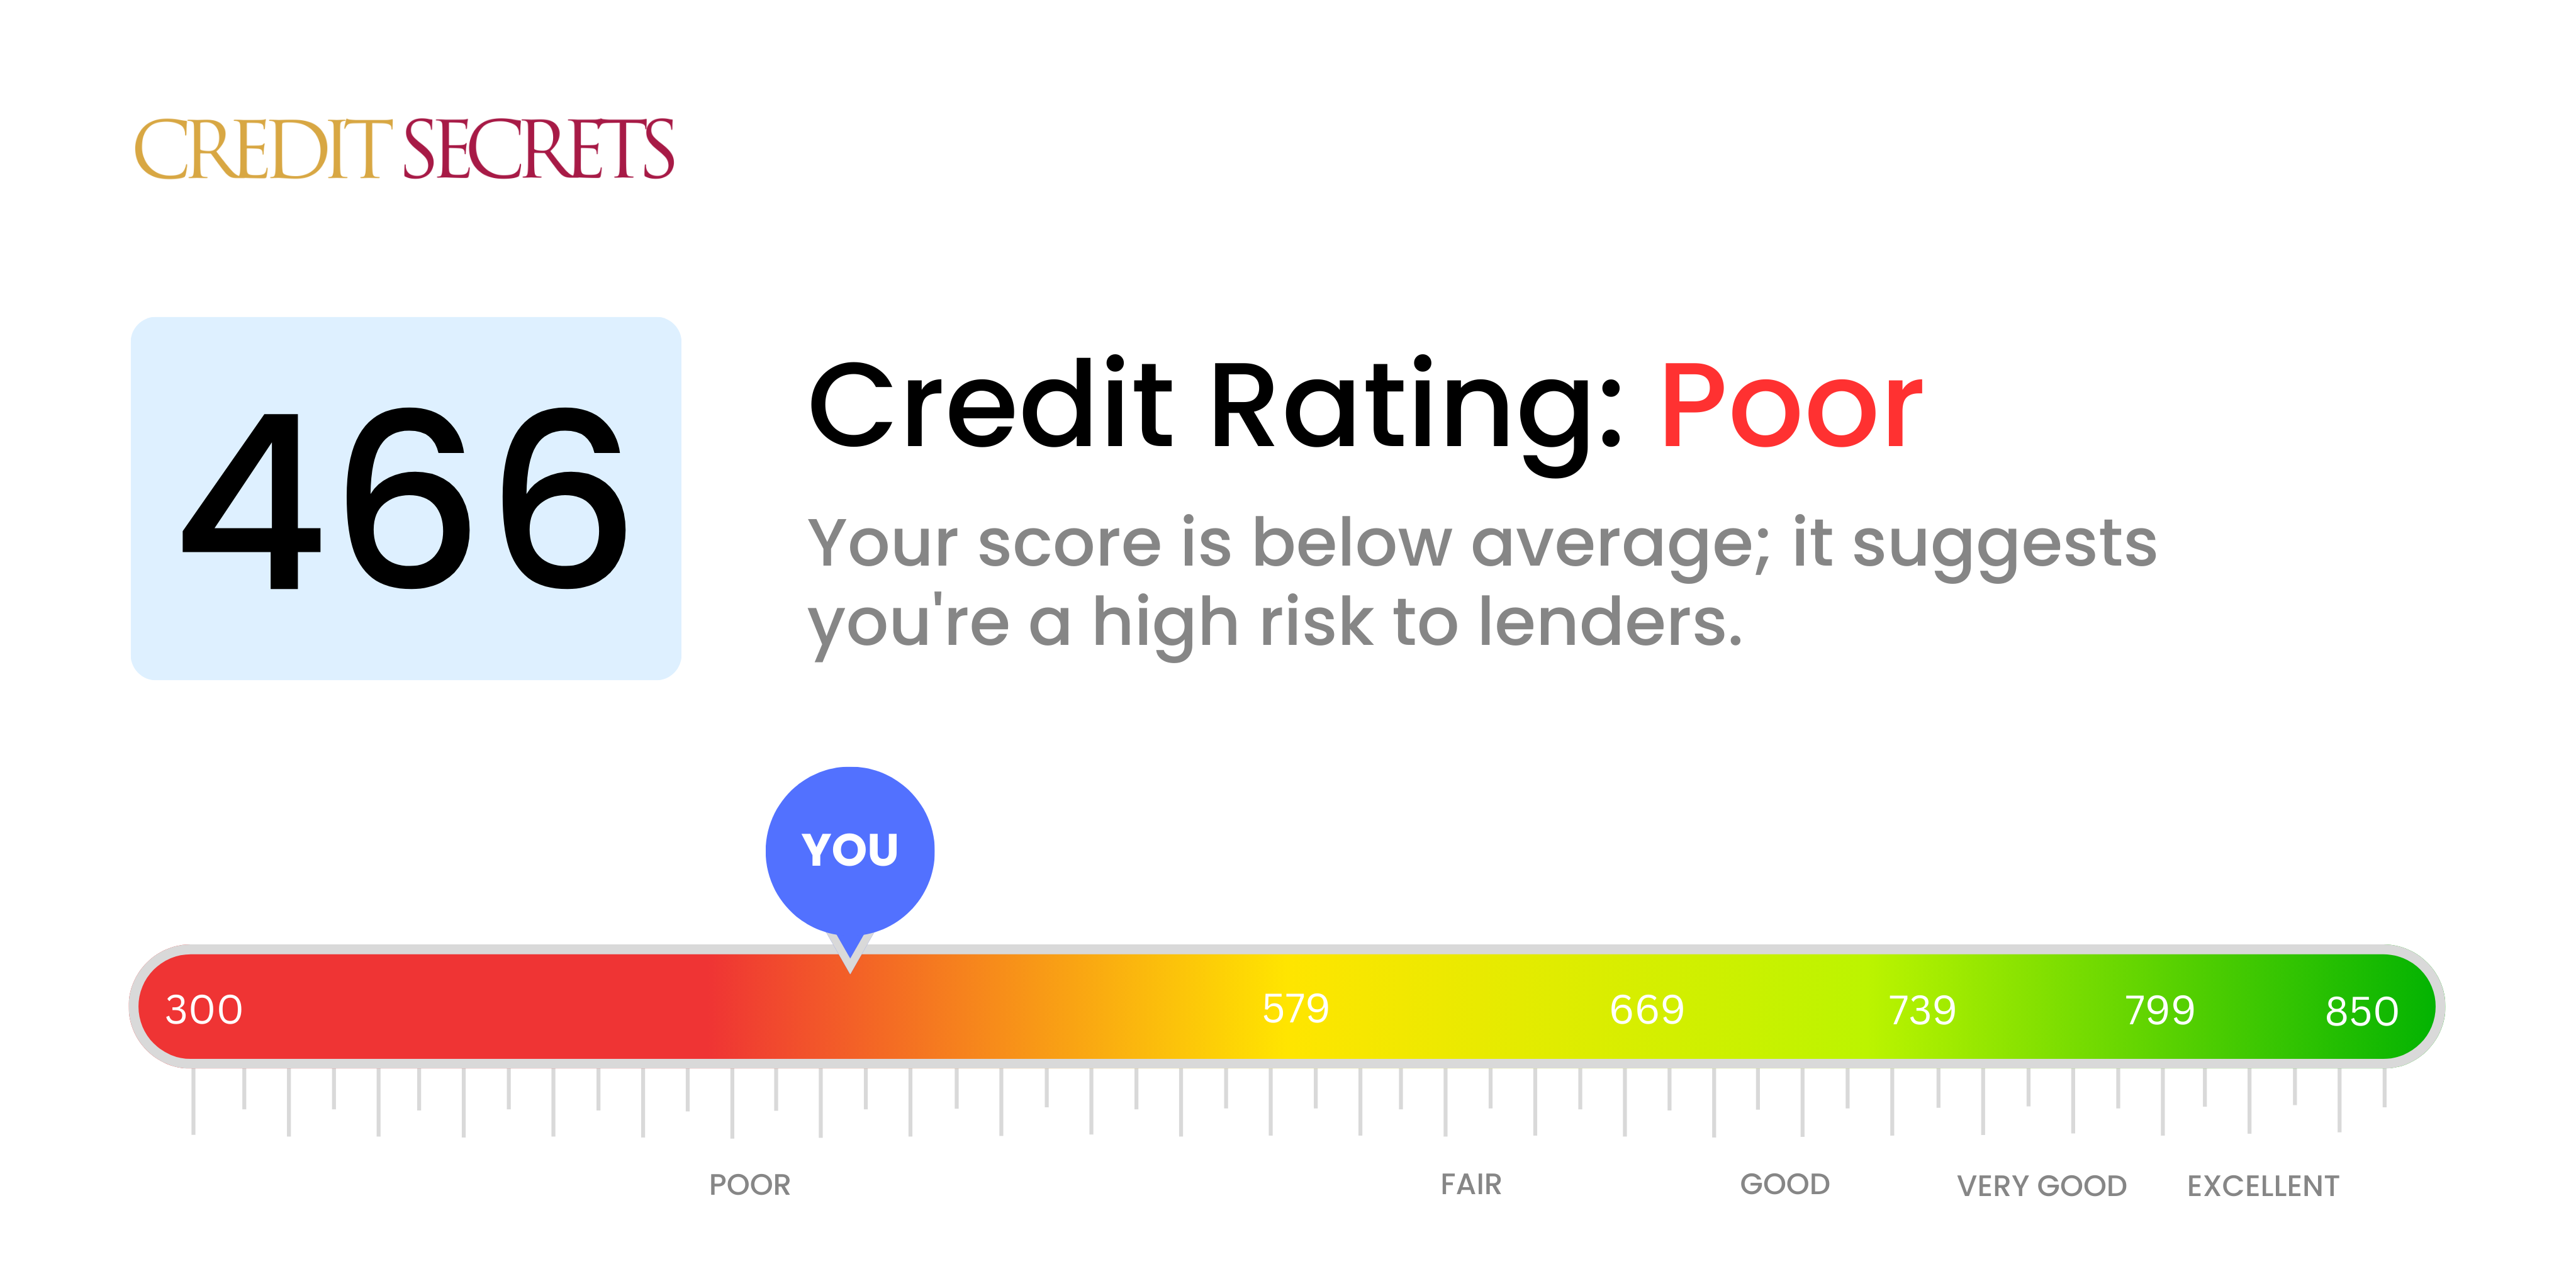 Is 466 a good credit score?